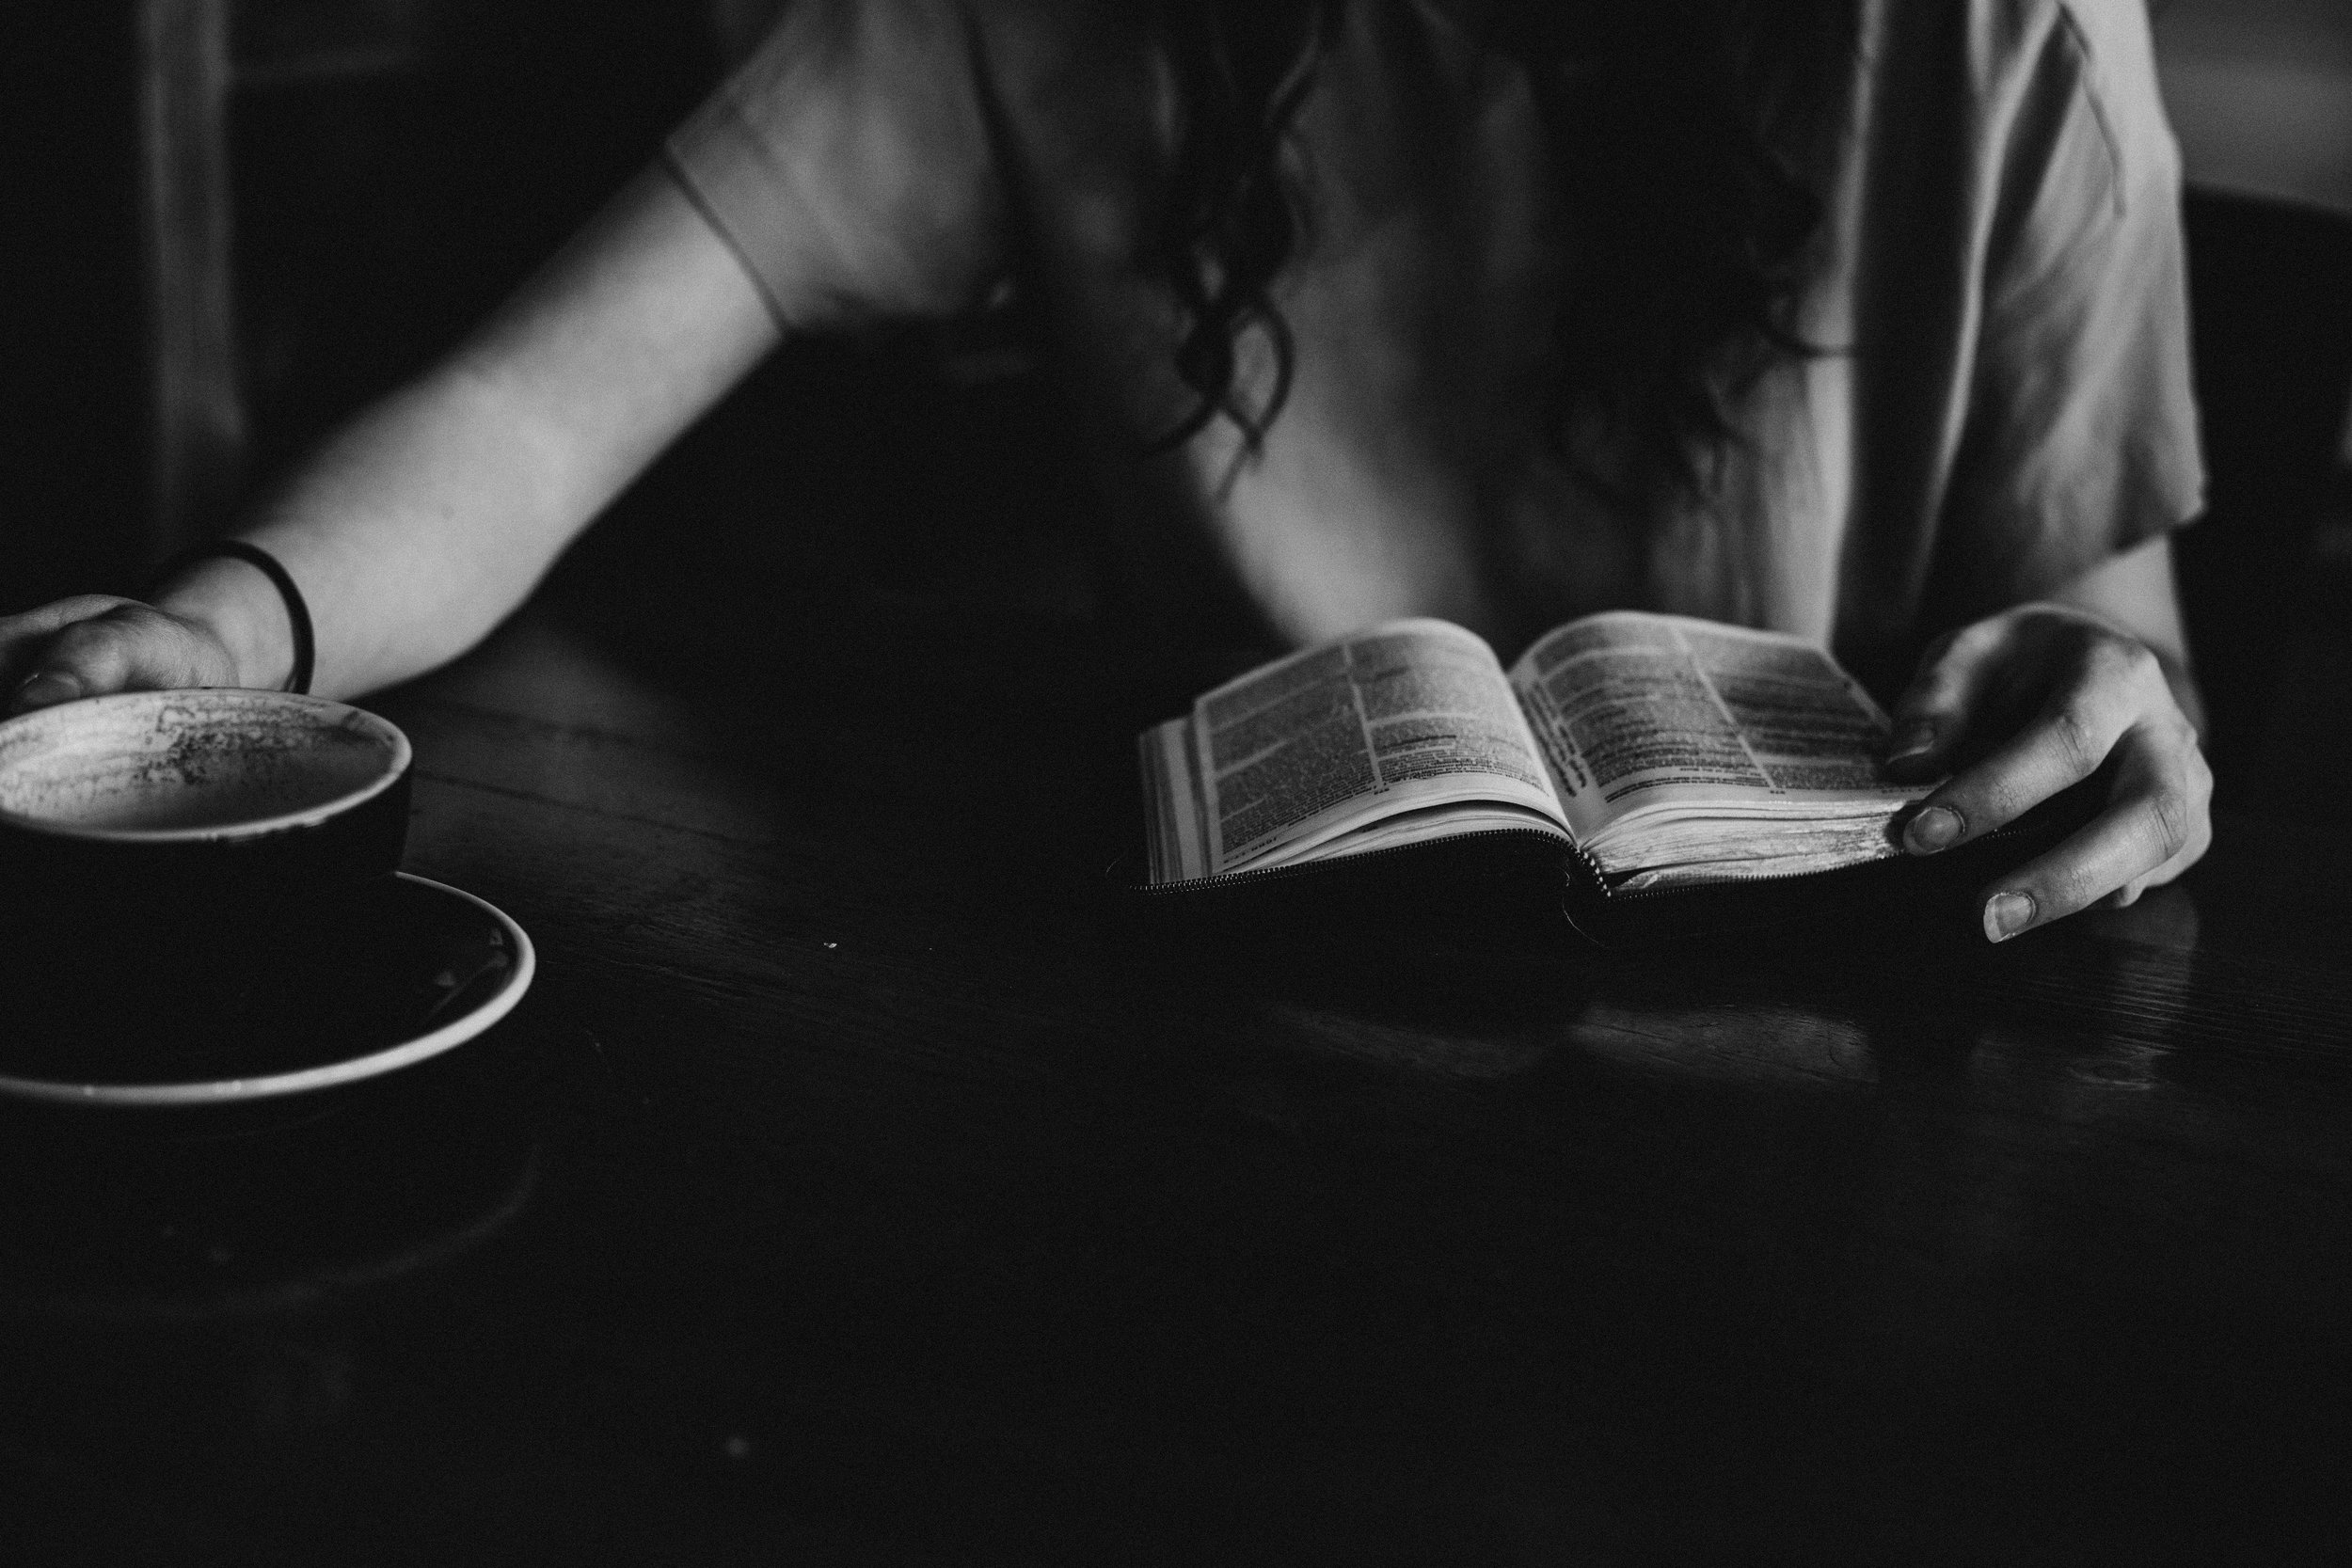 A person reads a book while reaching for a coffee cup